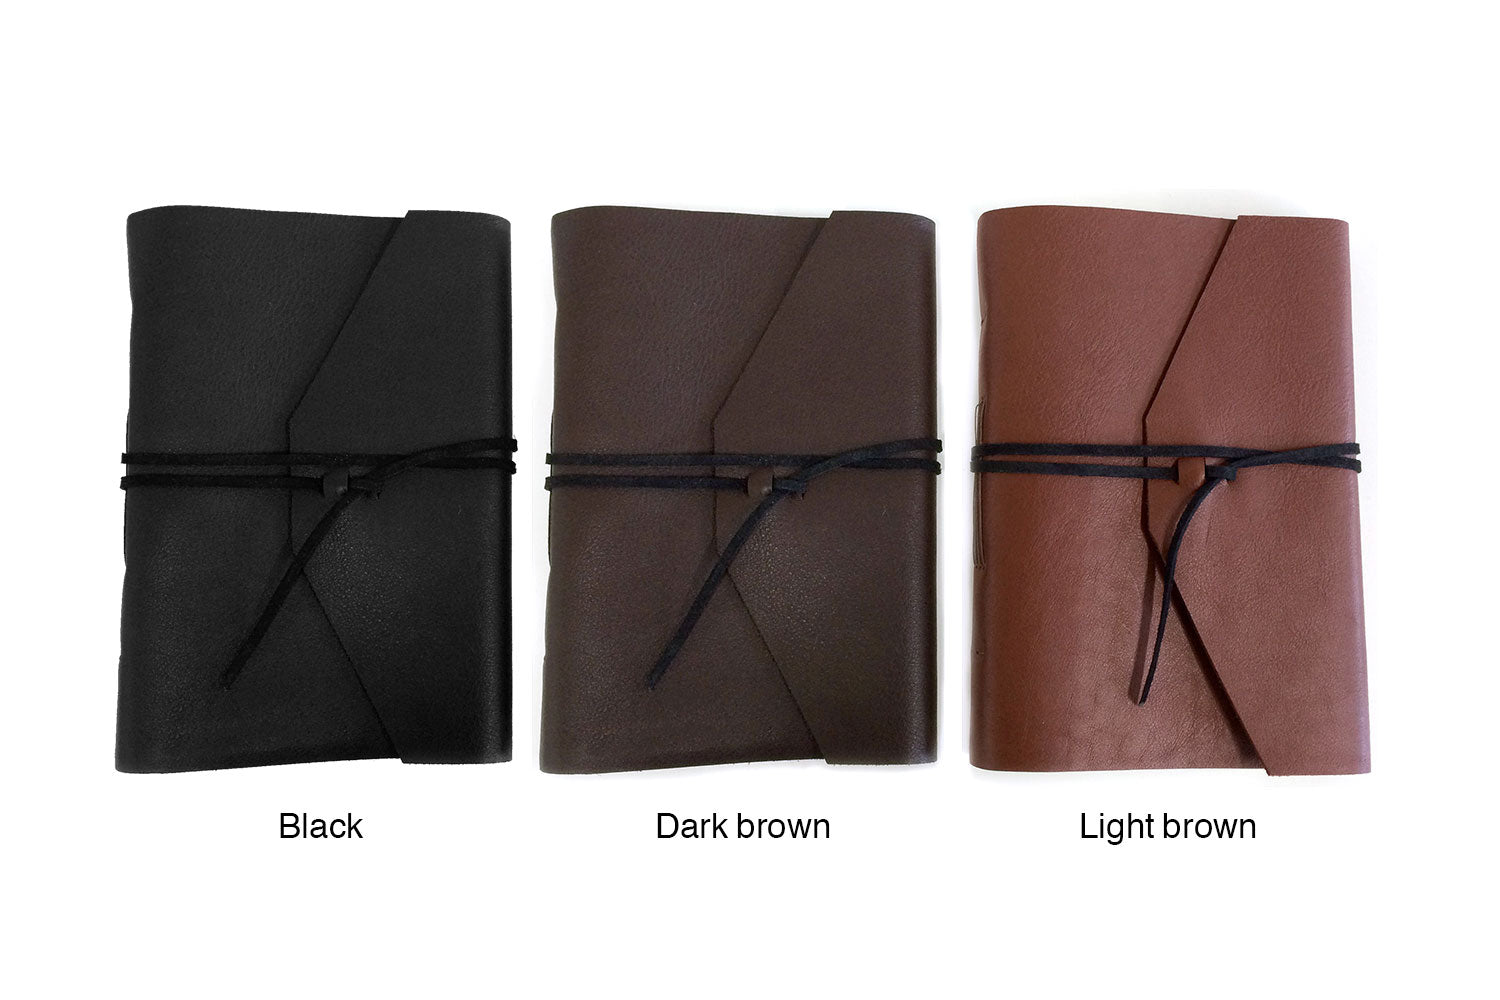 rustic leather guest book in black leather, dark brown leather, light brown leather